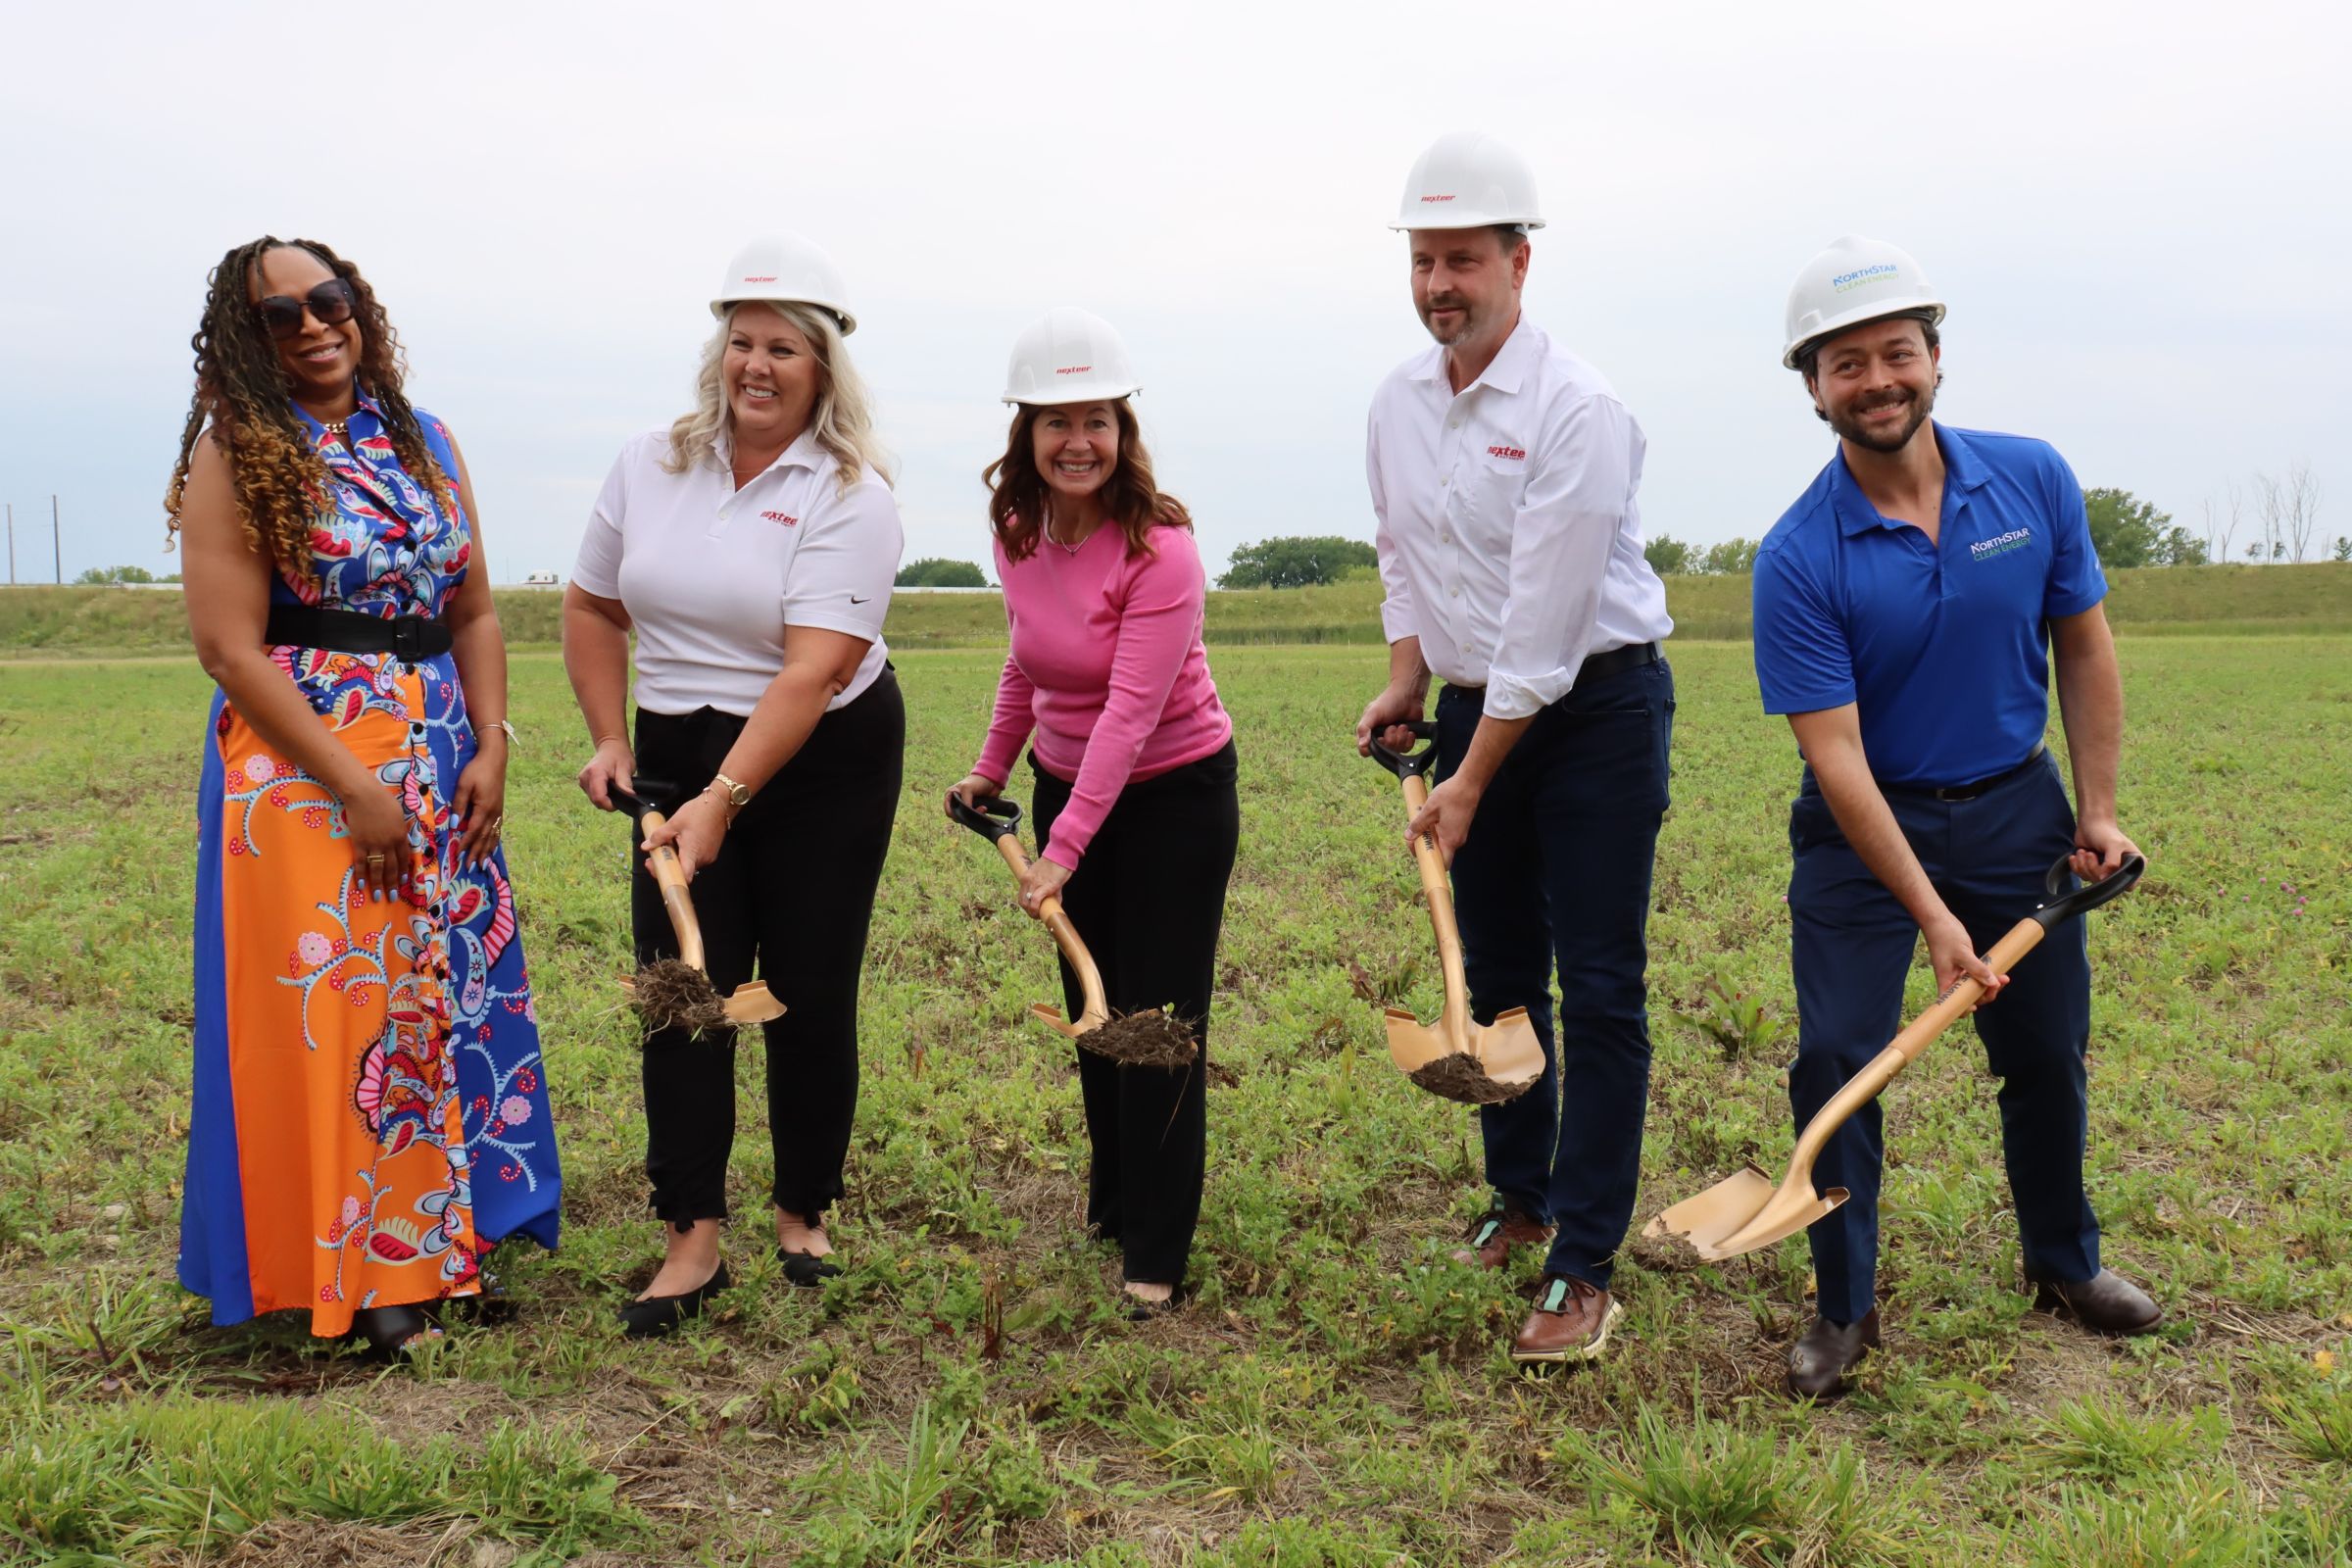 NEXTEER BREAKS GROUND ON SOLAR FIELD AT SAGINAW, MICH. SITE; PARTNERS WITH NORTHSTAR CLEAN ENERGY ON RENEWABLE ENERGY SOLUTION FOR USA OPERATIONS Photo